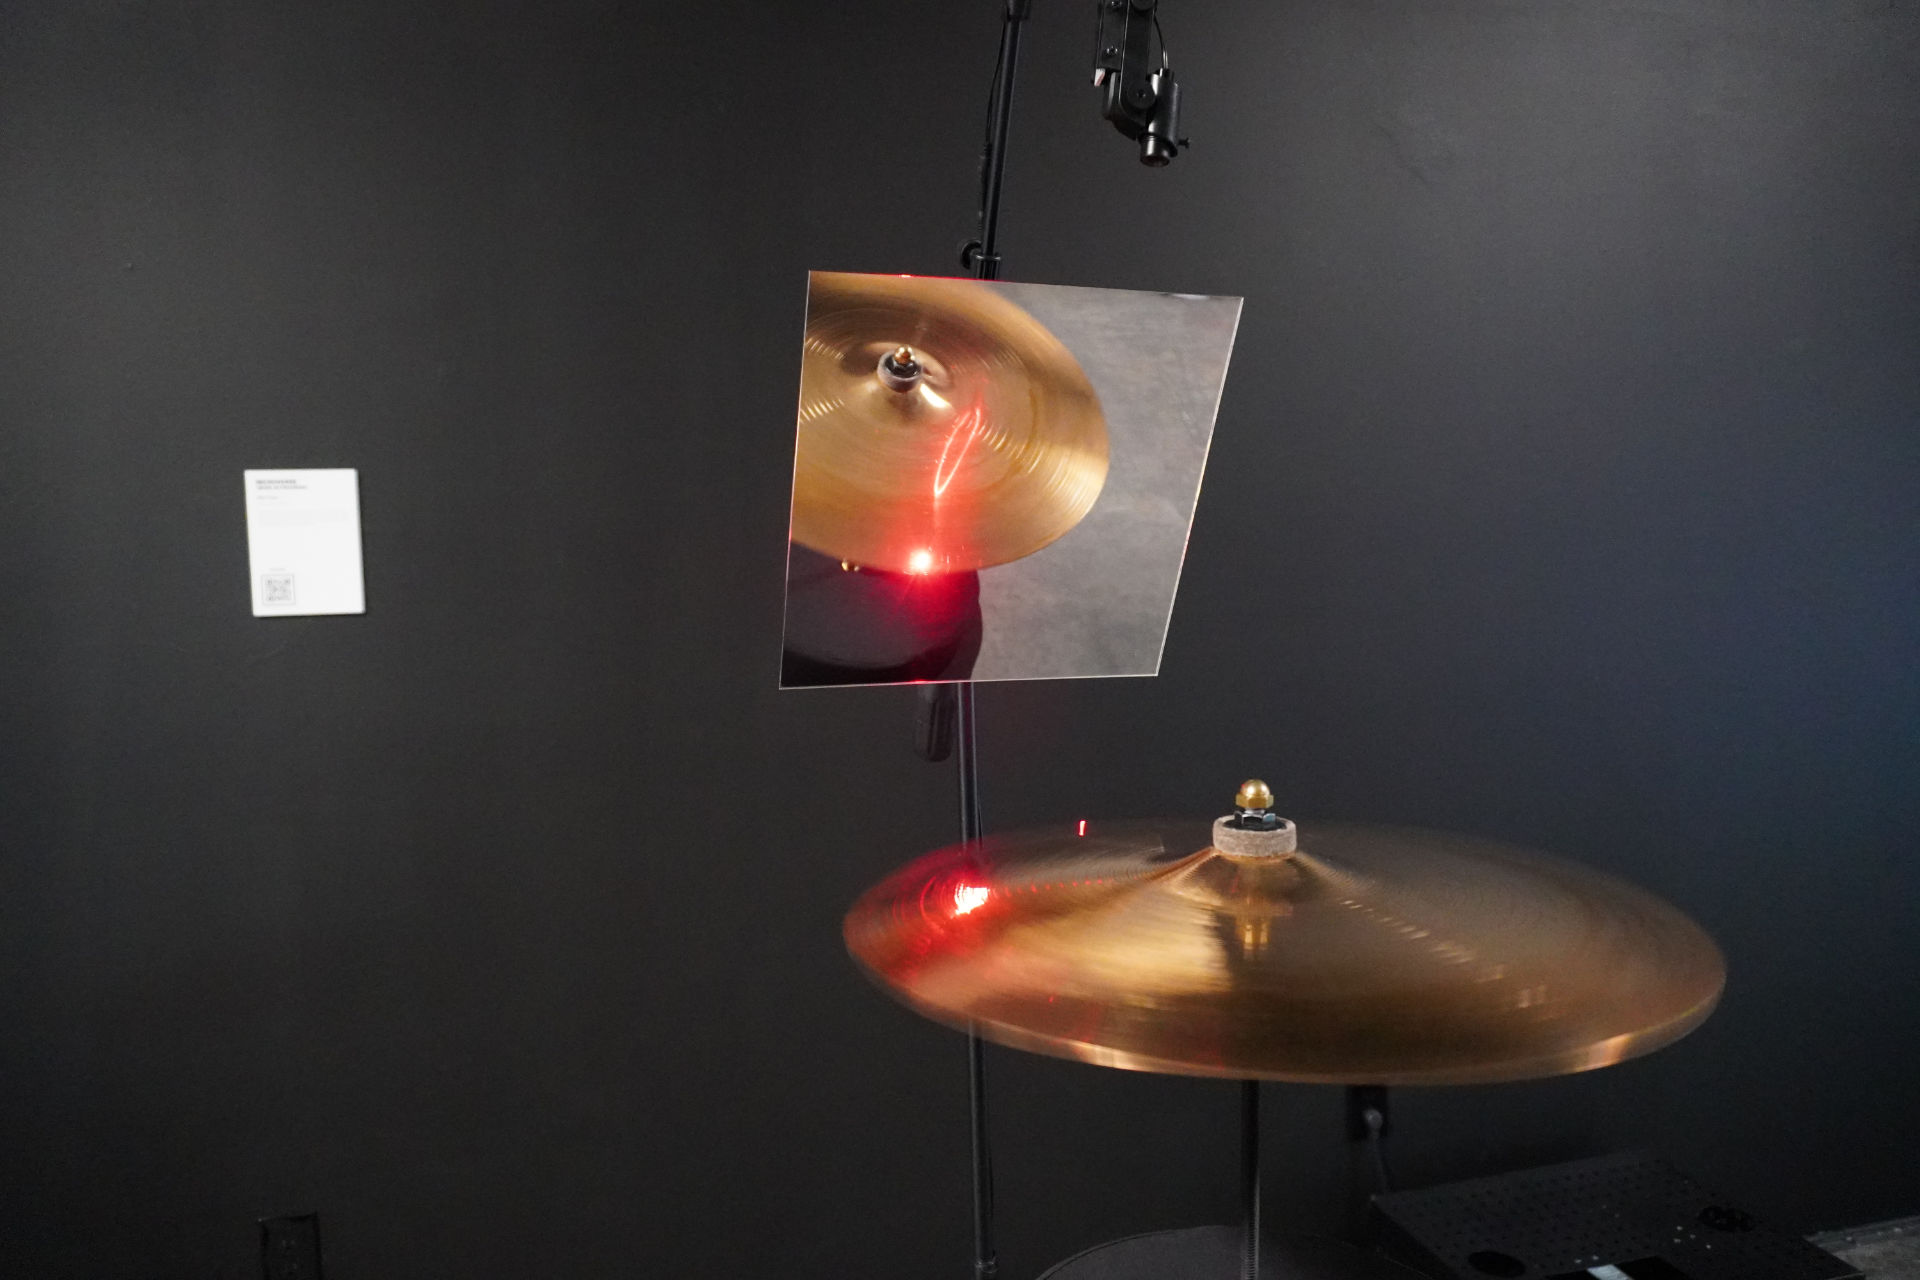 A hi-hat with a small red wave touching it, a representation of the Microverse artwork